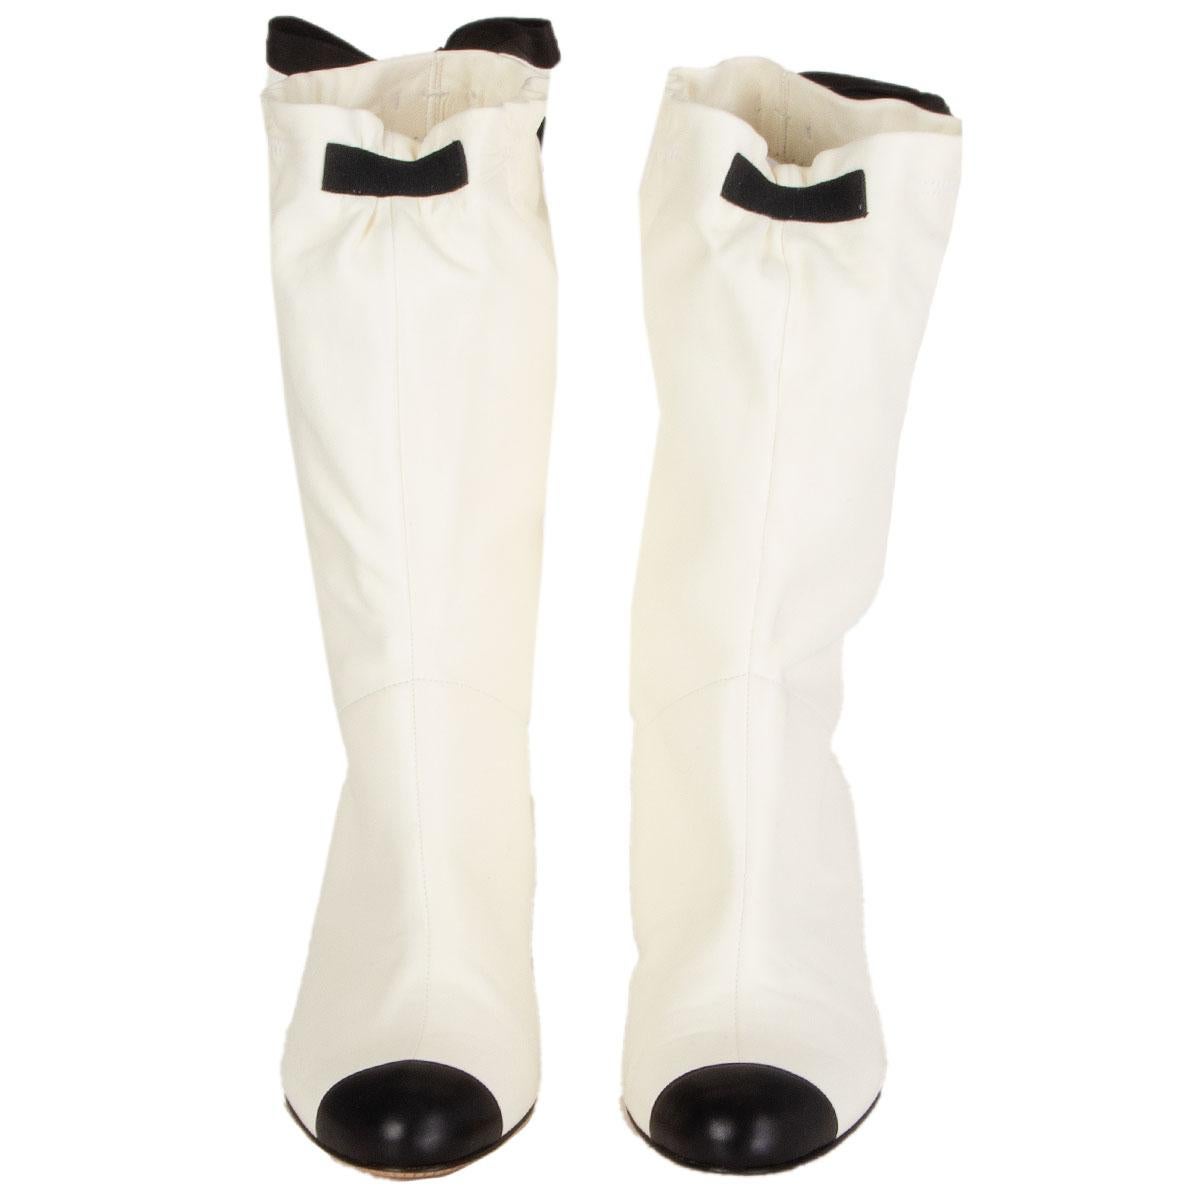 authentic Chanel mid-calf boots in off-white soft lambskin with a black toe and heel. Bow detail around calf. Bradn new. Comes with dust bag. 

Imprinted Size 37.5
Shoe Size 37.5
Inside Sole 24.5cm (9.6in)
Width 7.5cm (2.9in)
Heel 6cm (2.3in)
Shaft